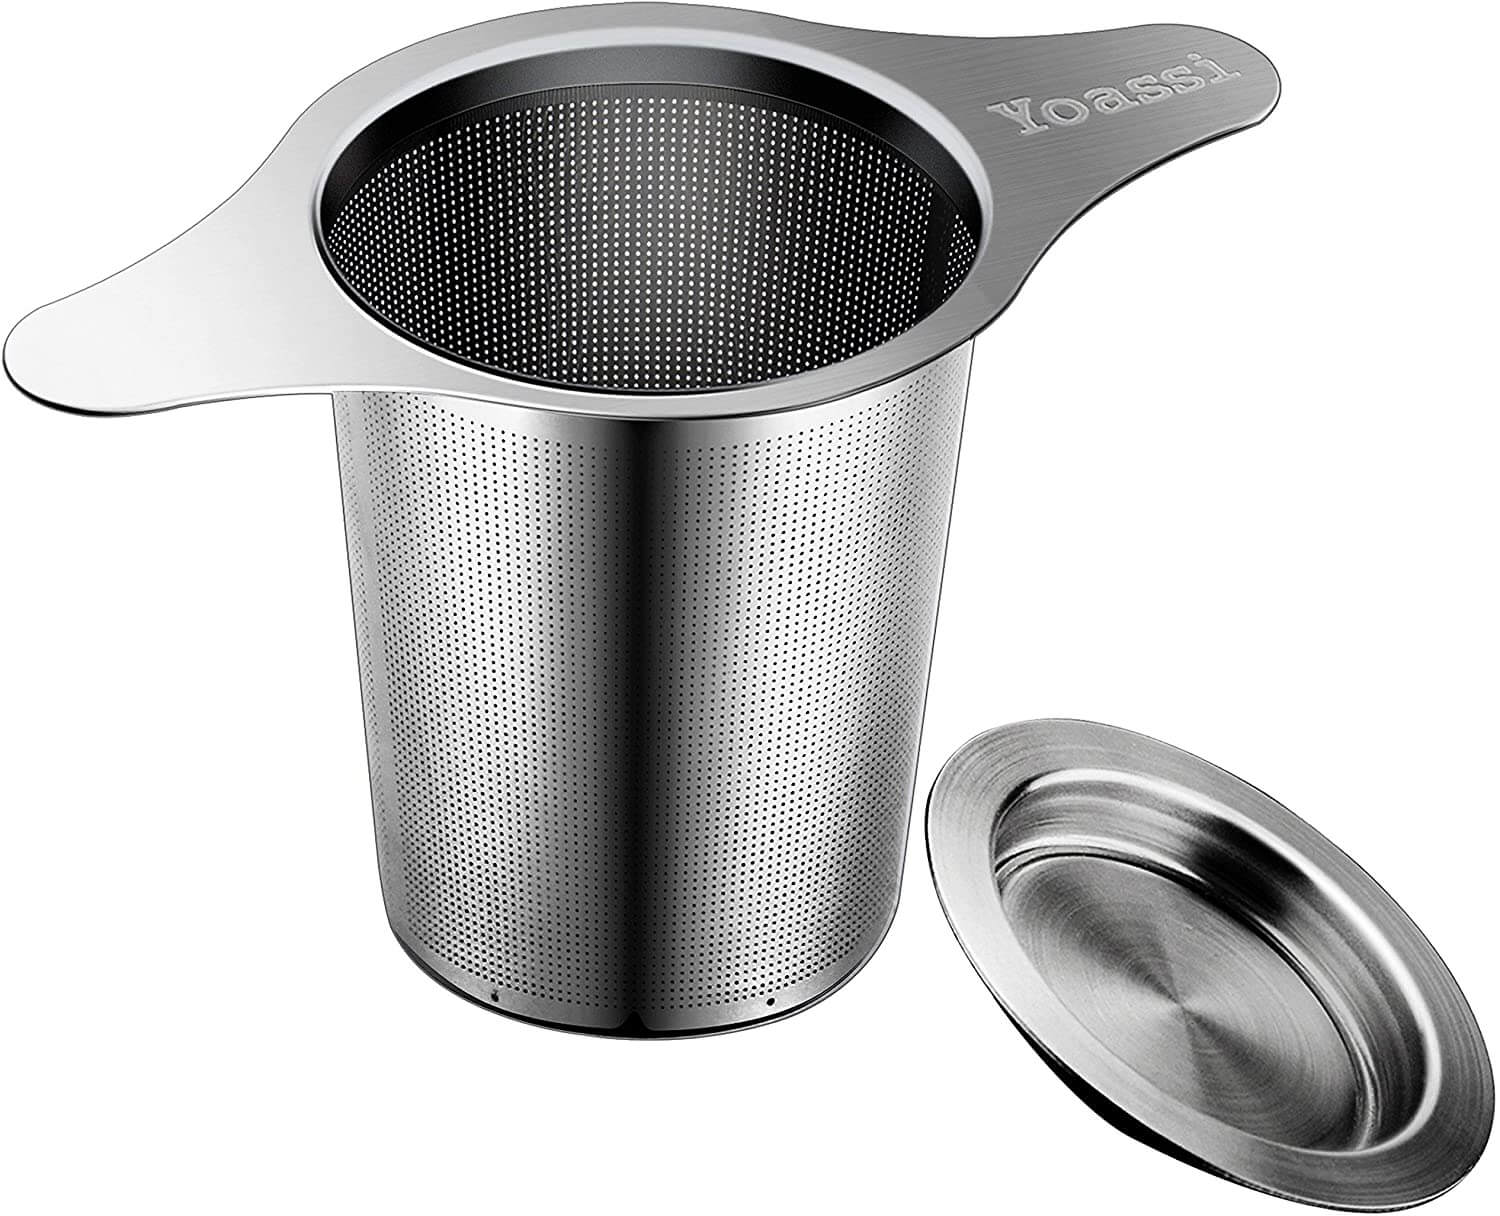 Yoassi Extra Fine Stainless Steel Tea Infuser